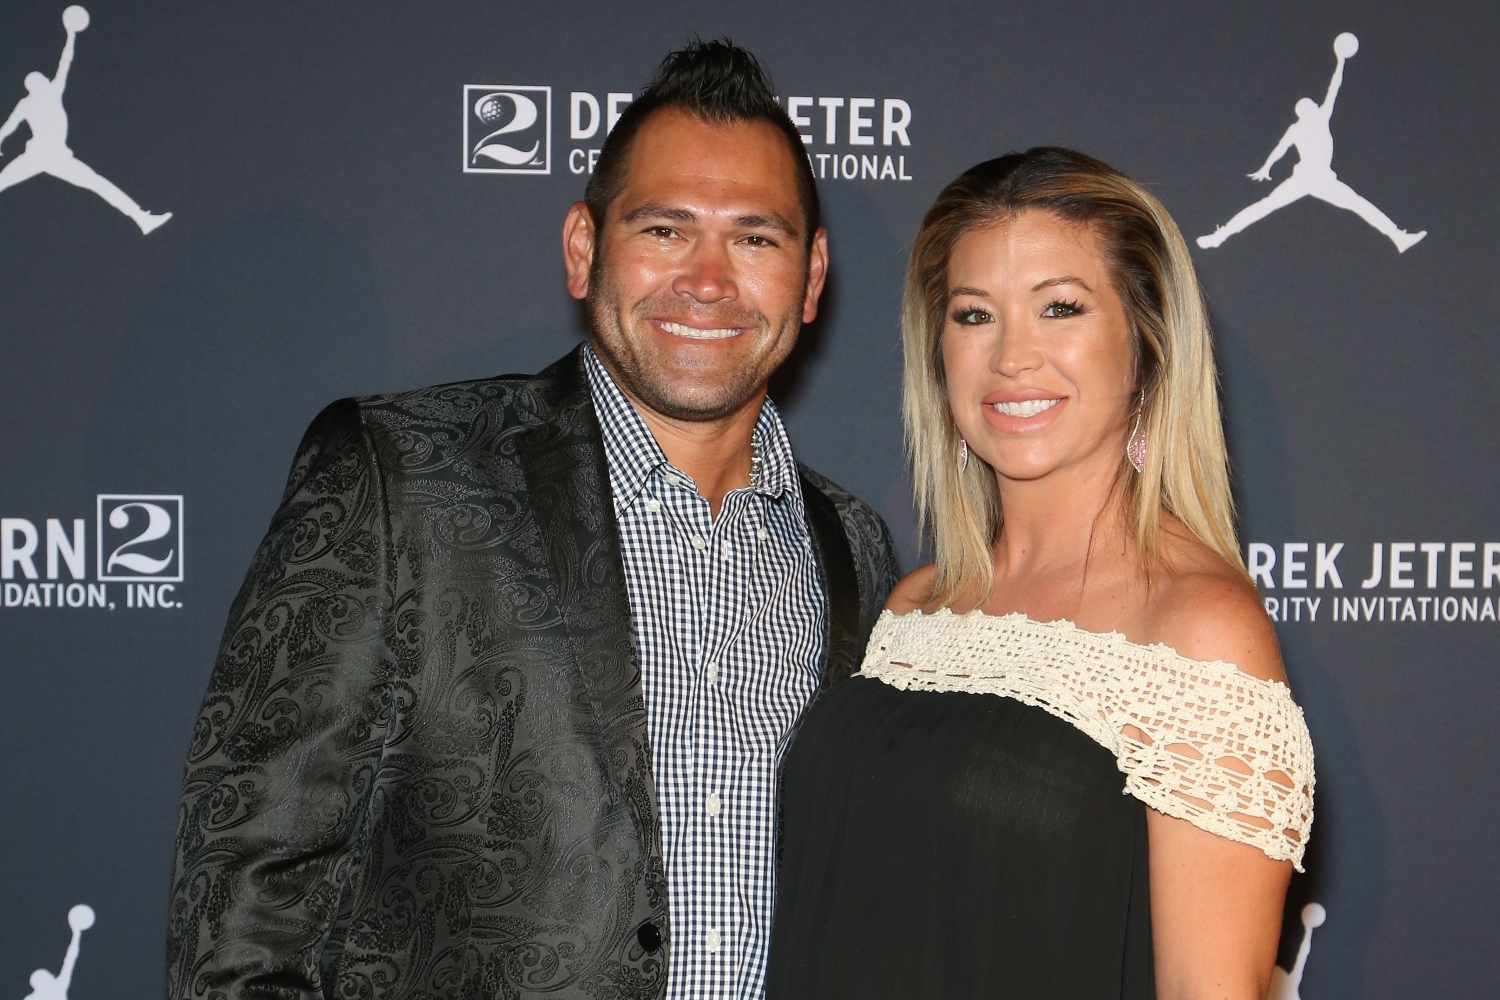 Former MLB player Johnny Damon and his wife, Michelle Damon, arrive at the Liquid Pool Lounge for the kickoff of Derek Jeter's Celebrity Invitational at the Aria Resort & Casino.